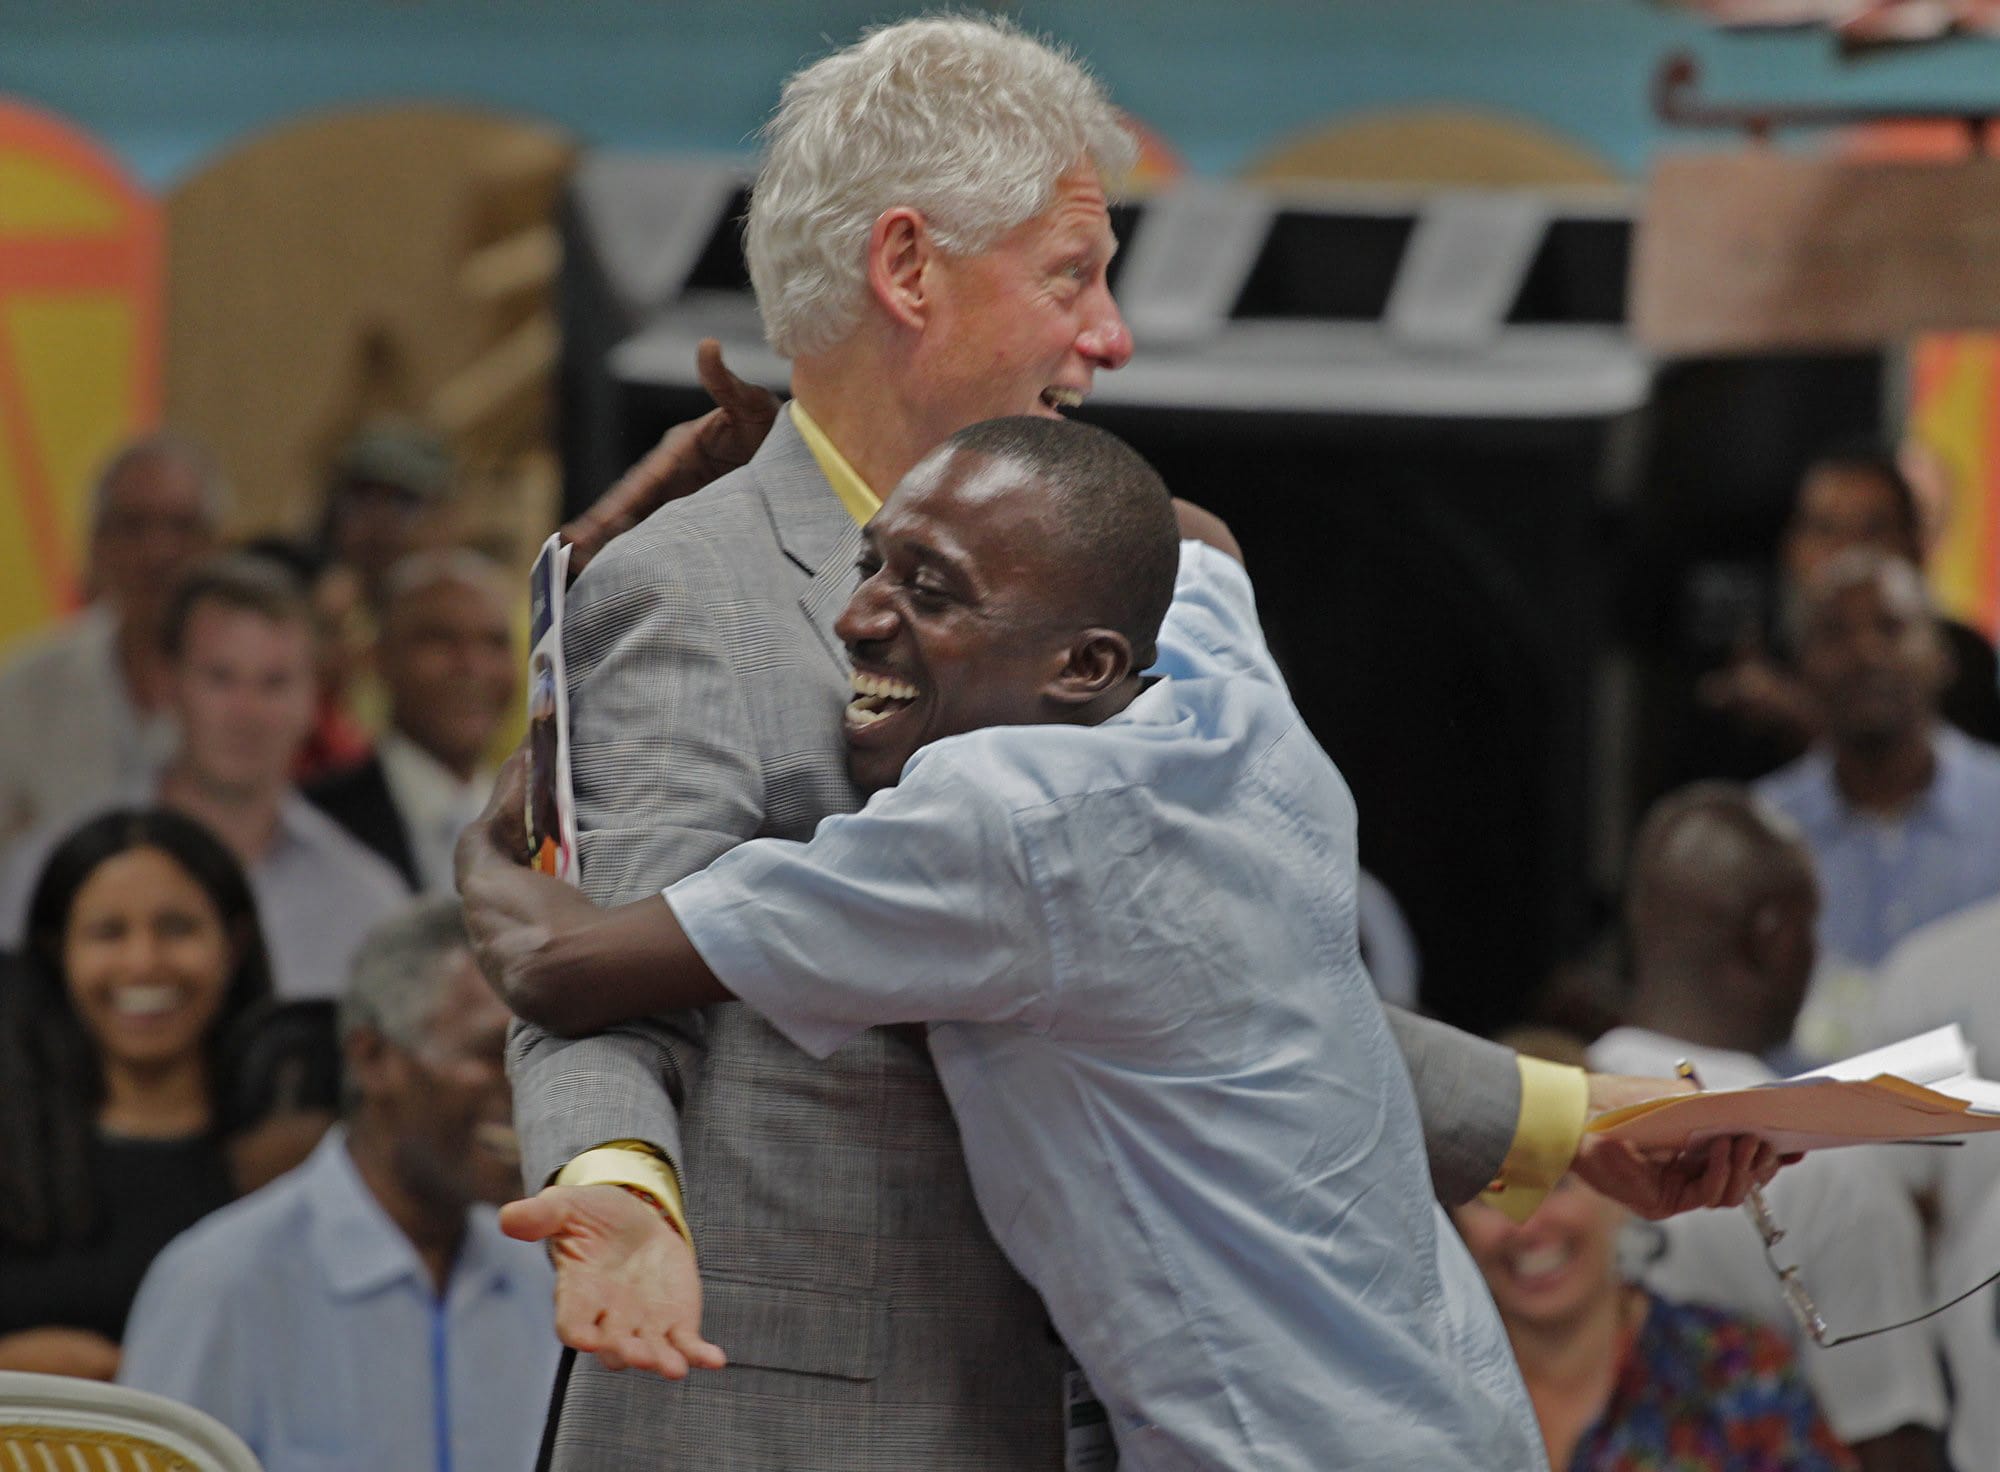 The very thankful Landry Colas, center, gives a big hug to former U.S. president Bill Clinton as he expresses his gratitude at the Caracol Industrial Park opened for business on October 22, 2012, in Caracol, Haiti.